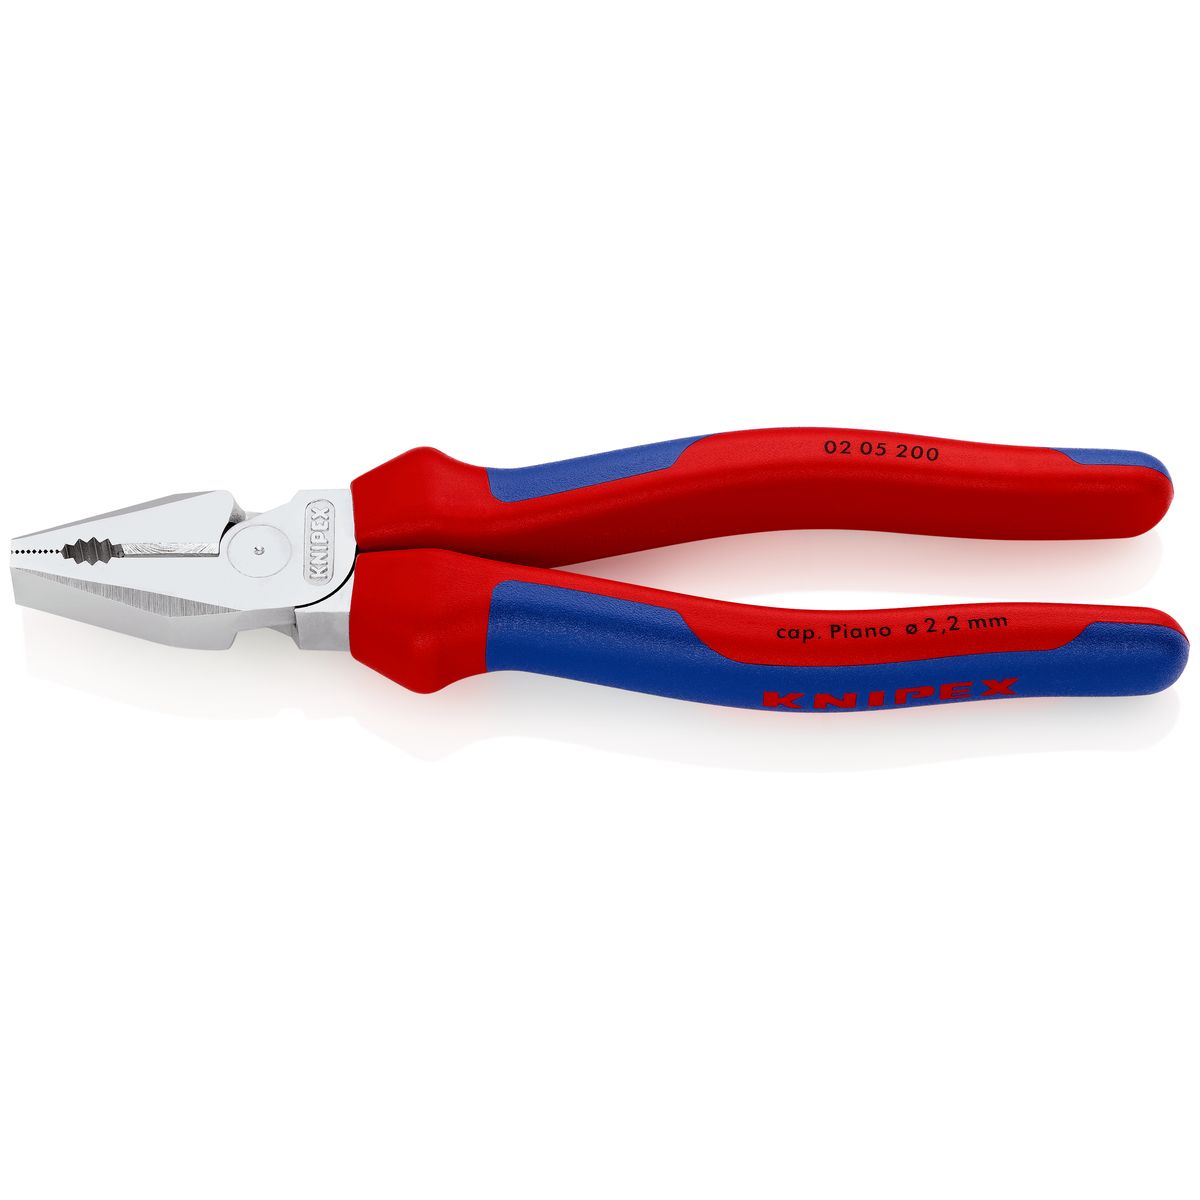 COMBINATION PLIERS 0205200 Knipex